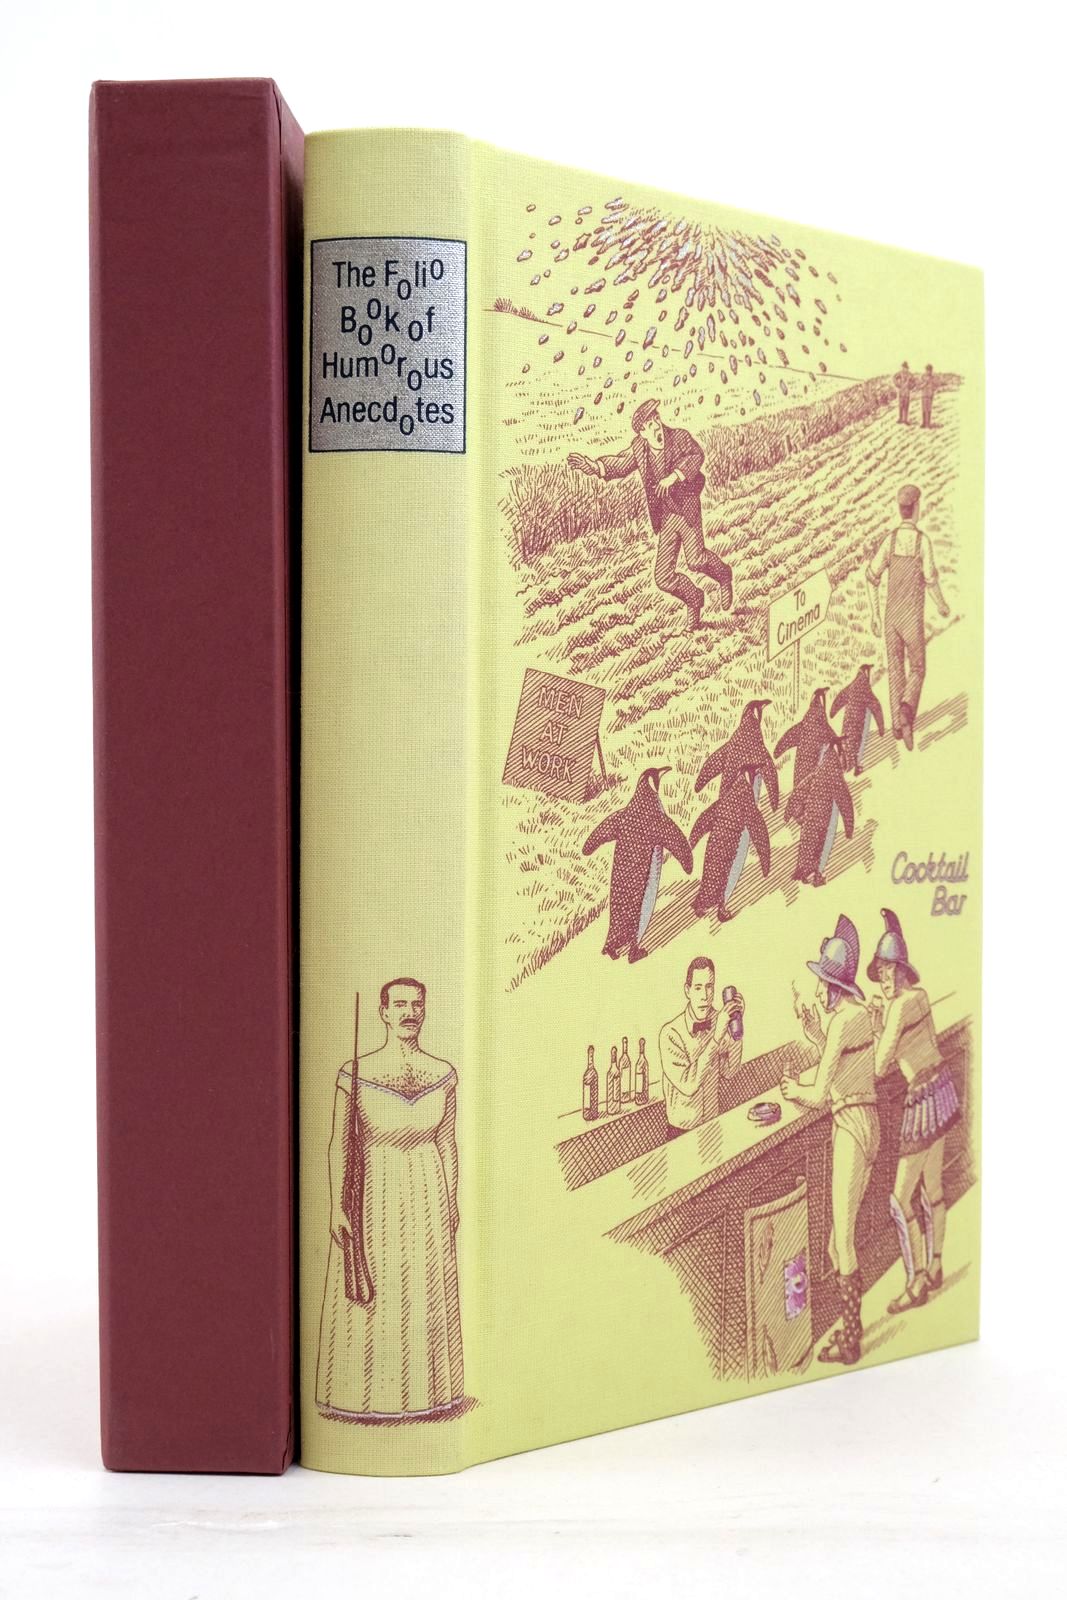 Photo of THE FOLIO BOOK OF HUMOROUS ANECDOTES written by Leeson, Edward illustrated by Hardcastle, Nick published by Folio Society (STOCK CODE: 2137871)  for sale by Stella & Rose's Books